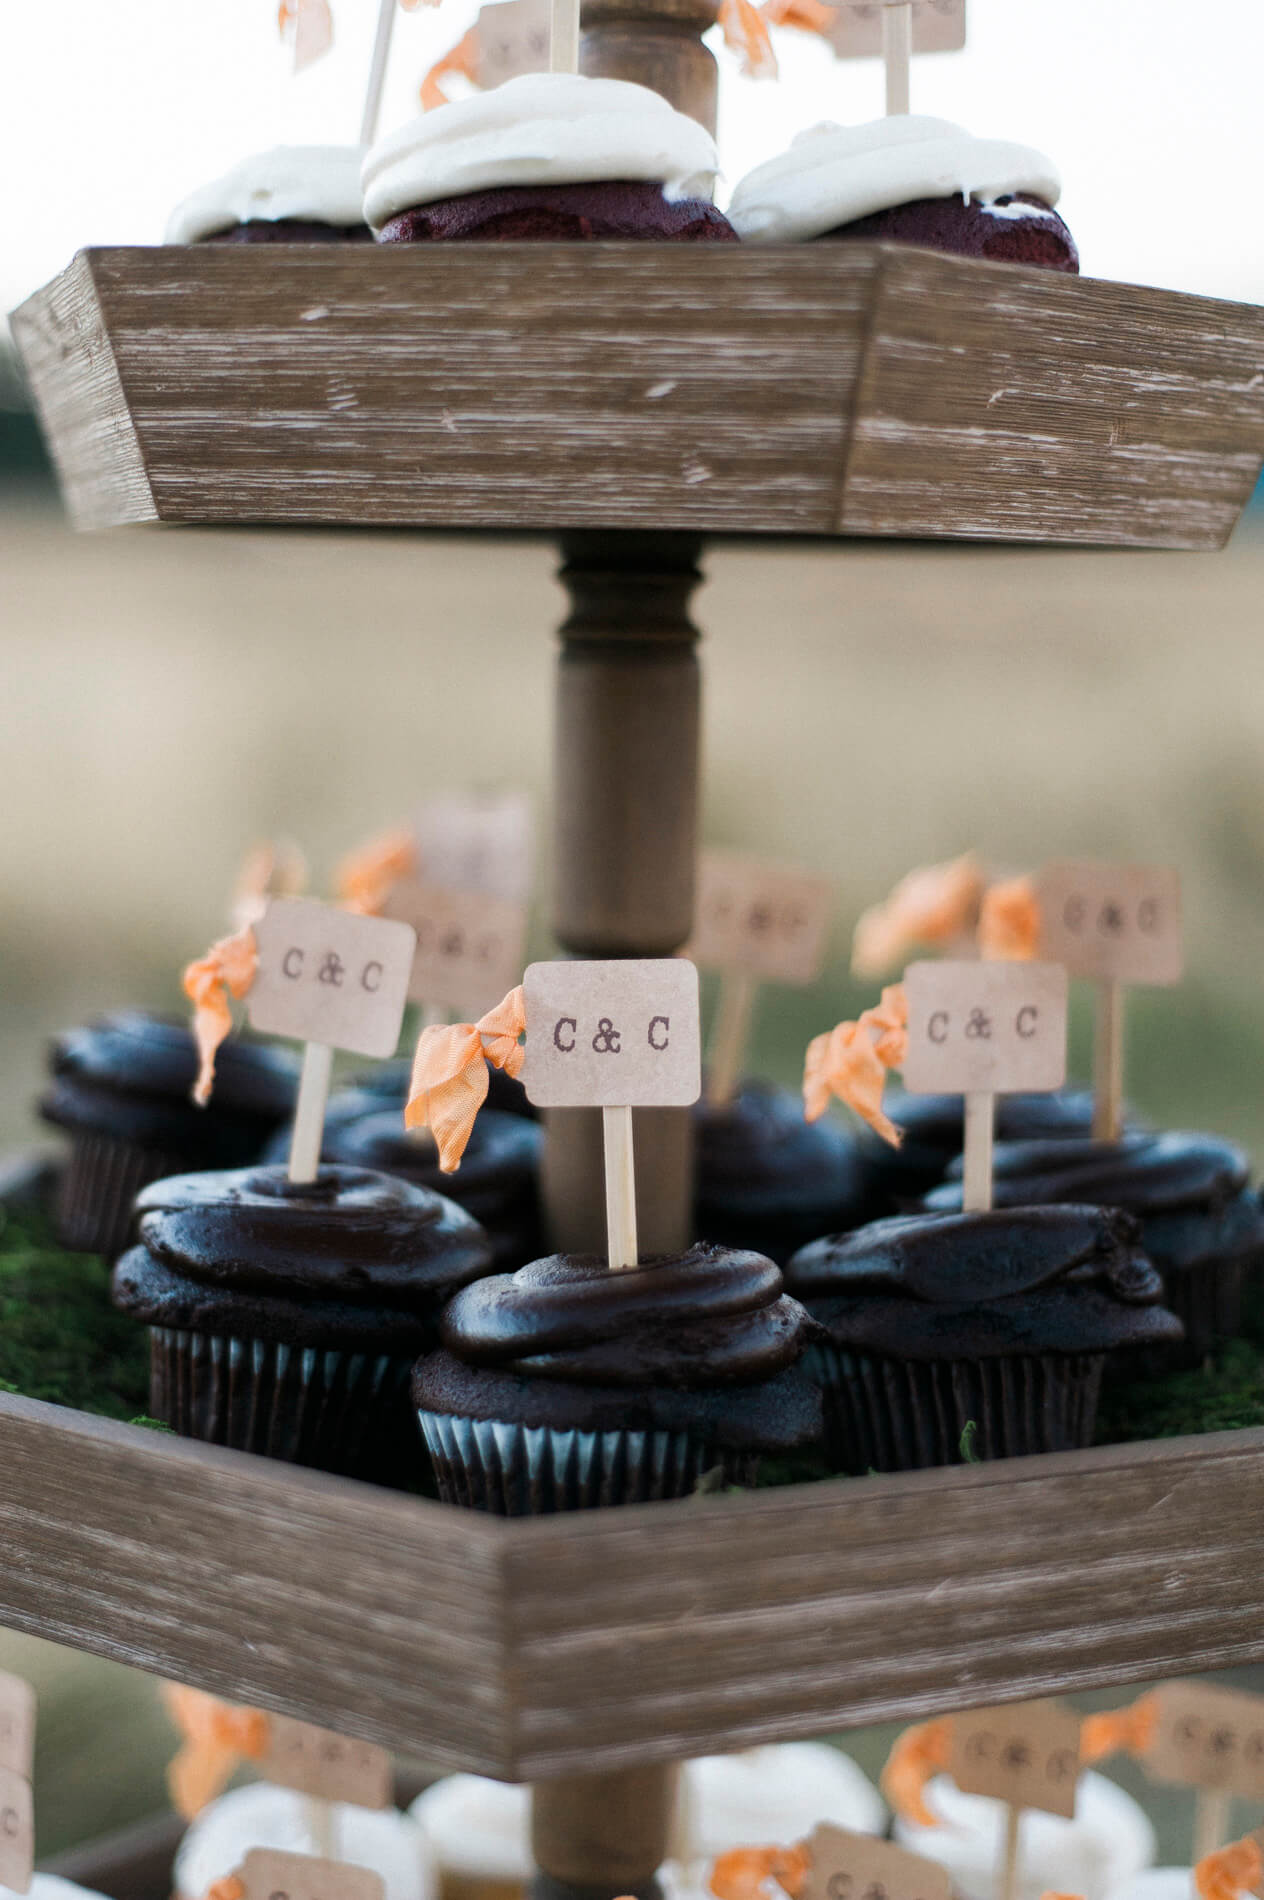 cupcakes with bride and groom initials 